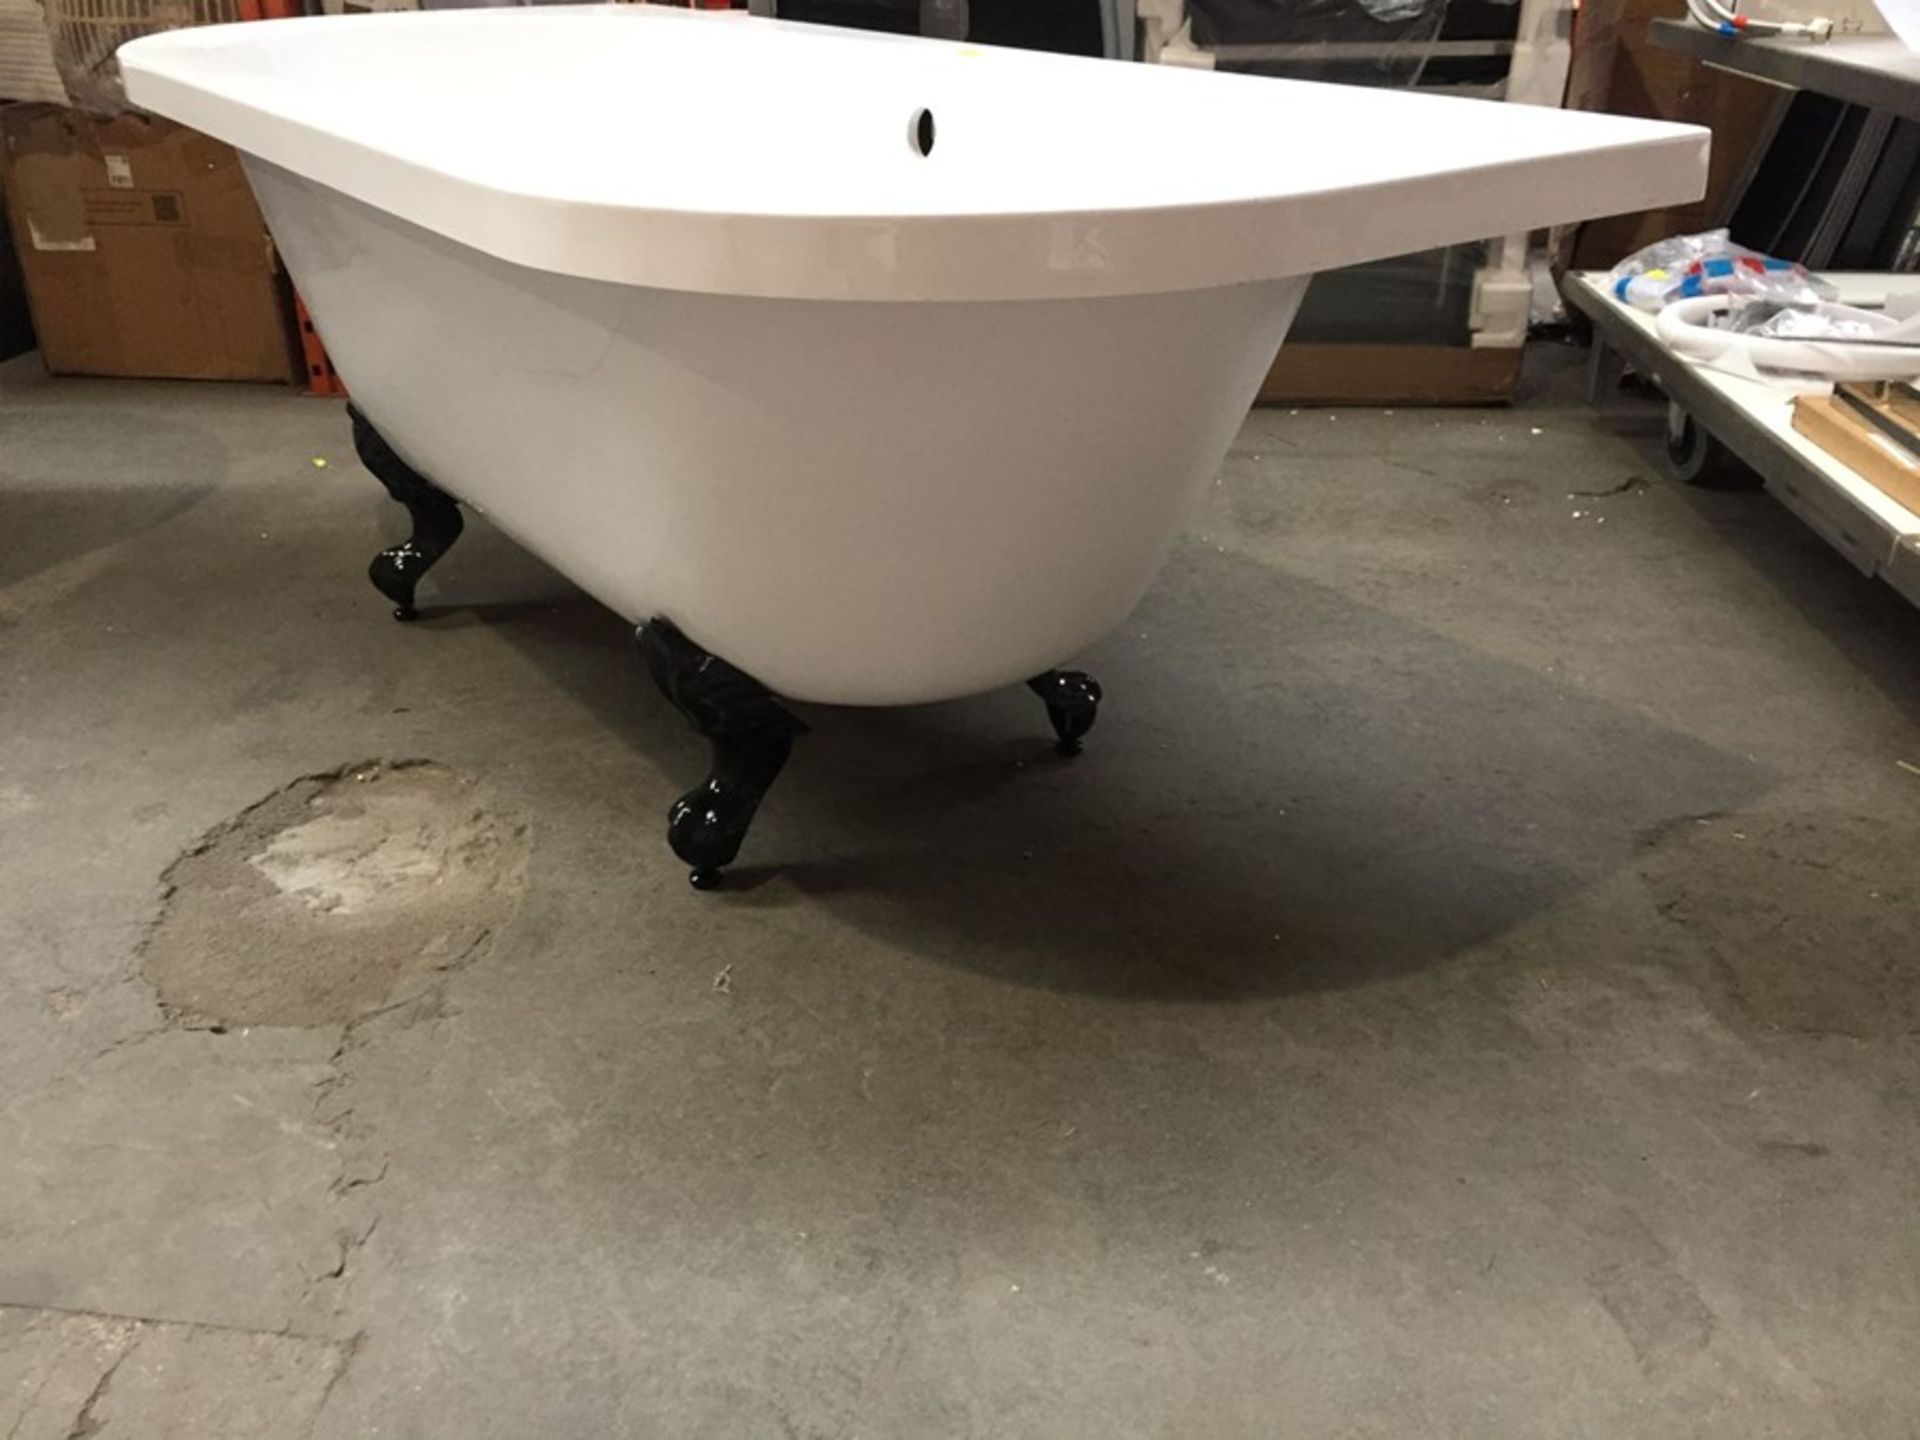 BATHSTORE BELMONT 1700X770 DOUBLE ENDED BACK TO WALL FREE STANDING BATH WITH BALL & CLAWFEET. RRP £